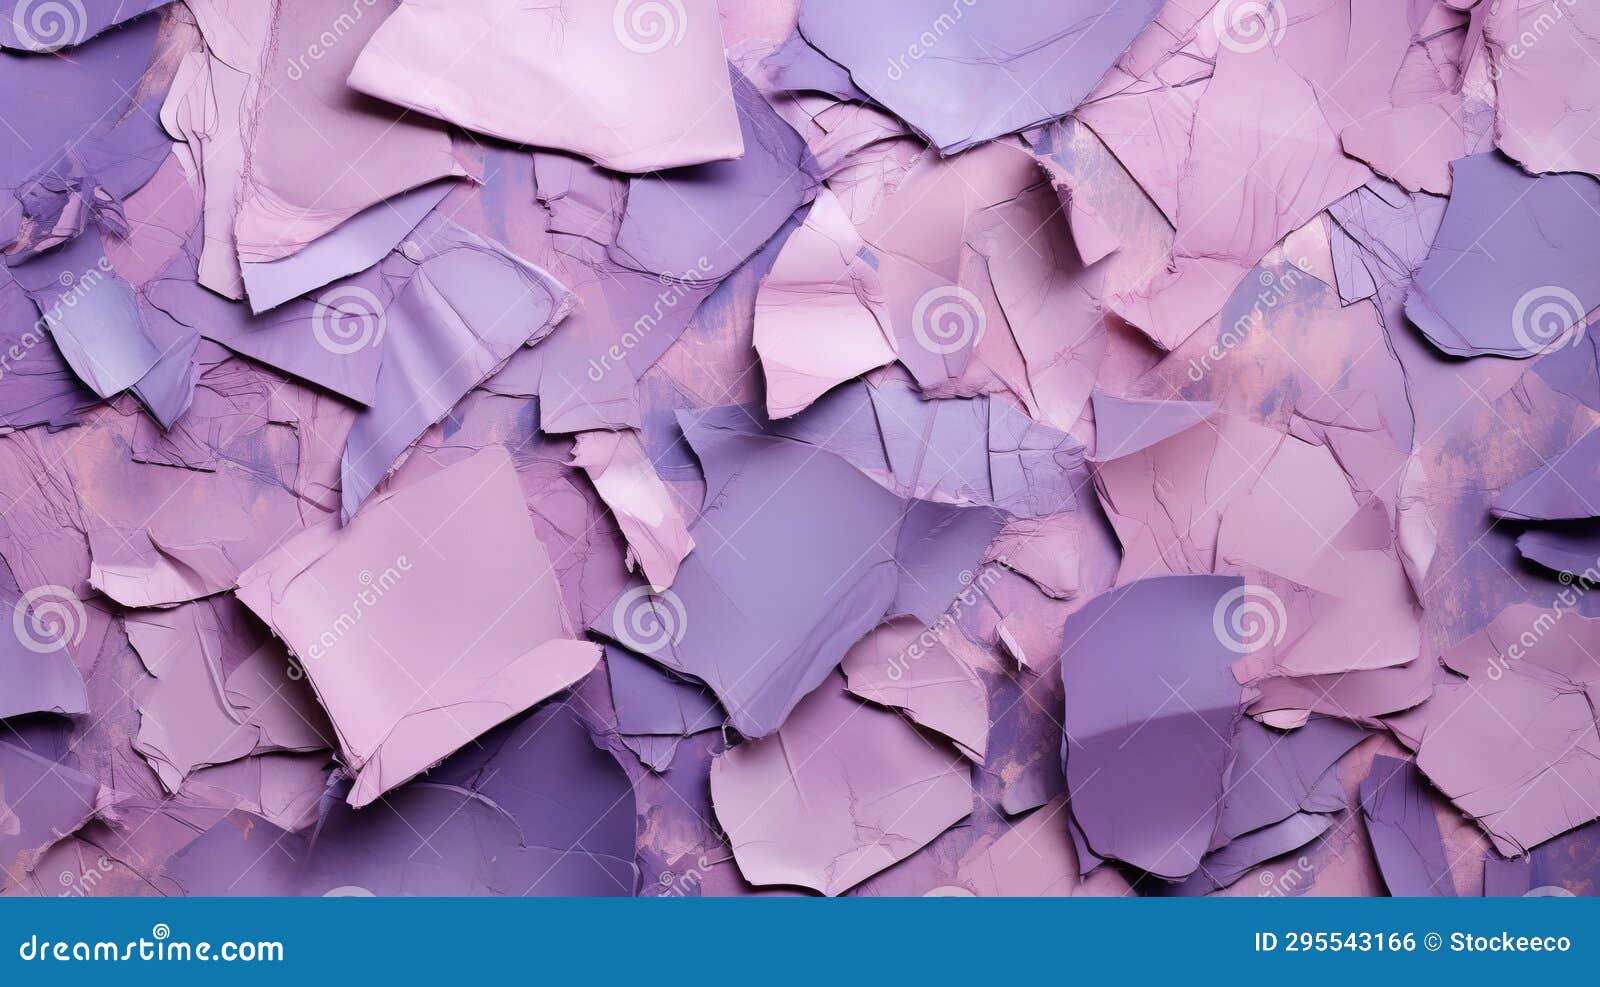 abstract art collage with purple tones and ripped leather